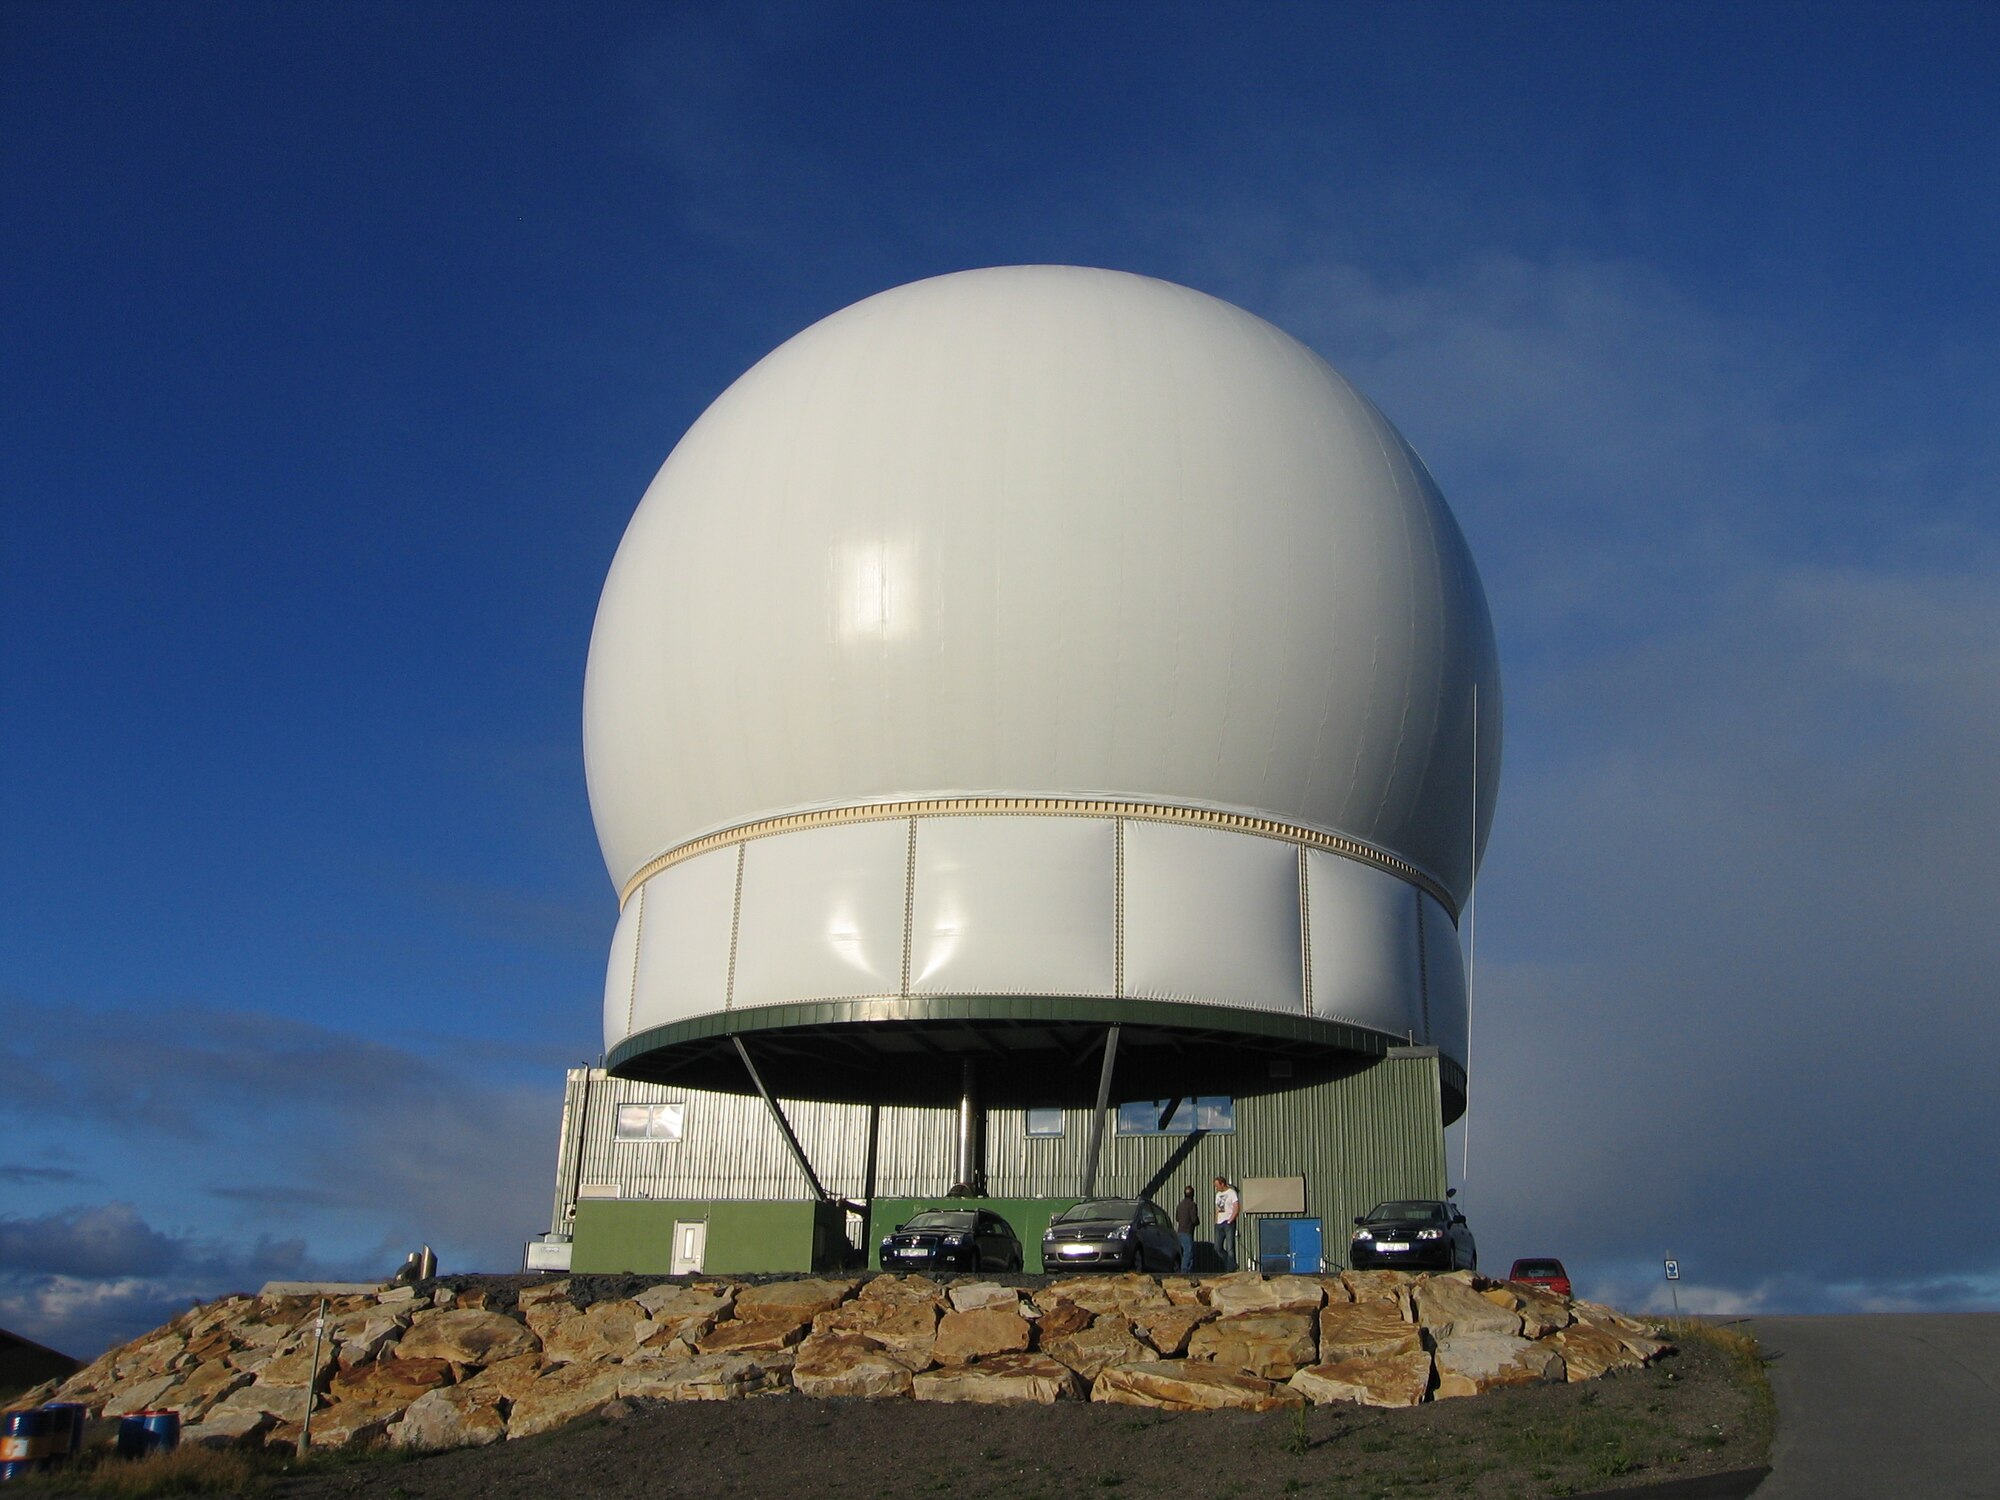 GLOBUS II is pictured above. GLOBUS II a radar system located at Vardo, Norway, that is operated solely by Norwegian personnel, but which was developed by the United States and serves as part of the 29-sensor, global space surveillance network that provides data to the US Strategic Command.  Engineers from AFRL/RX recently made a trip to Norway to perform thermography inspections on the radar cover.